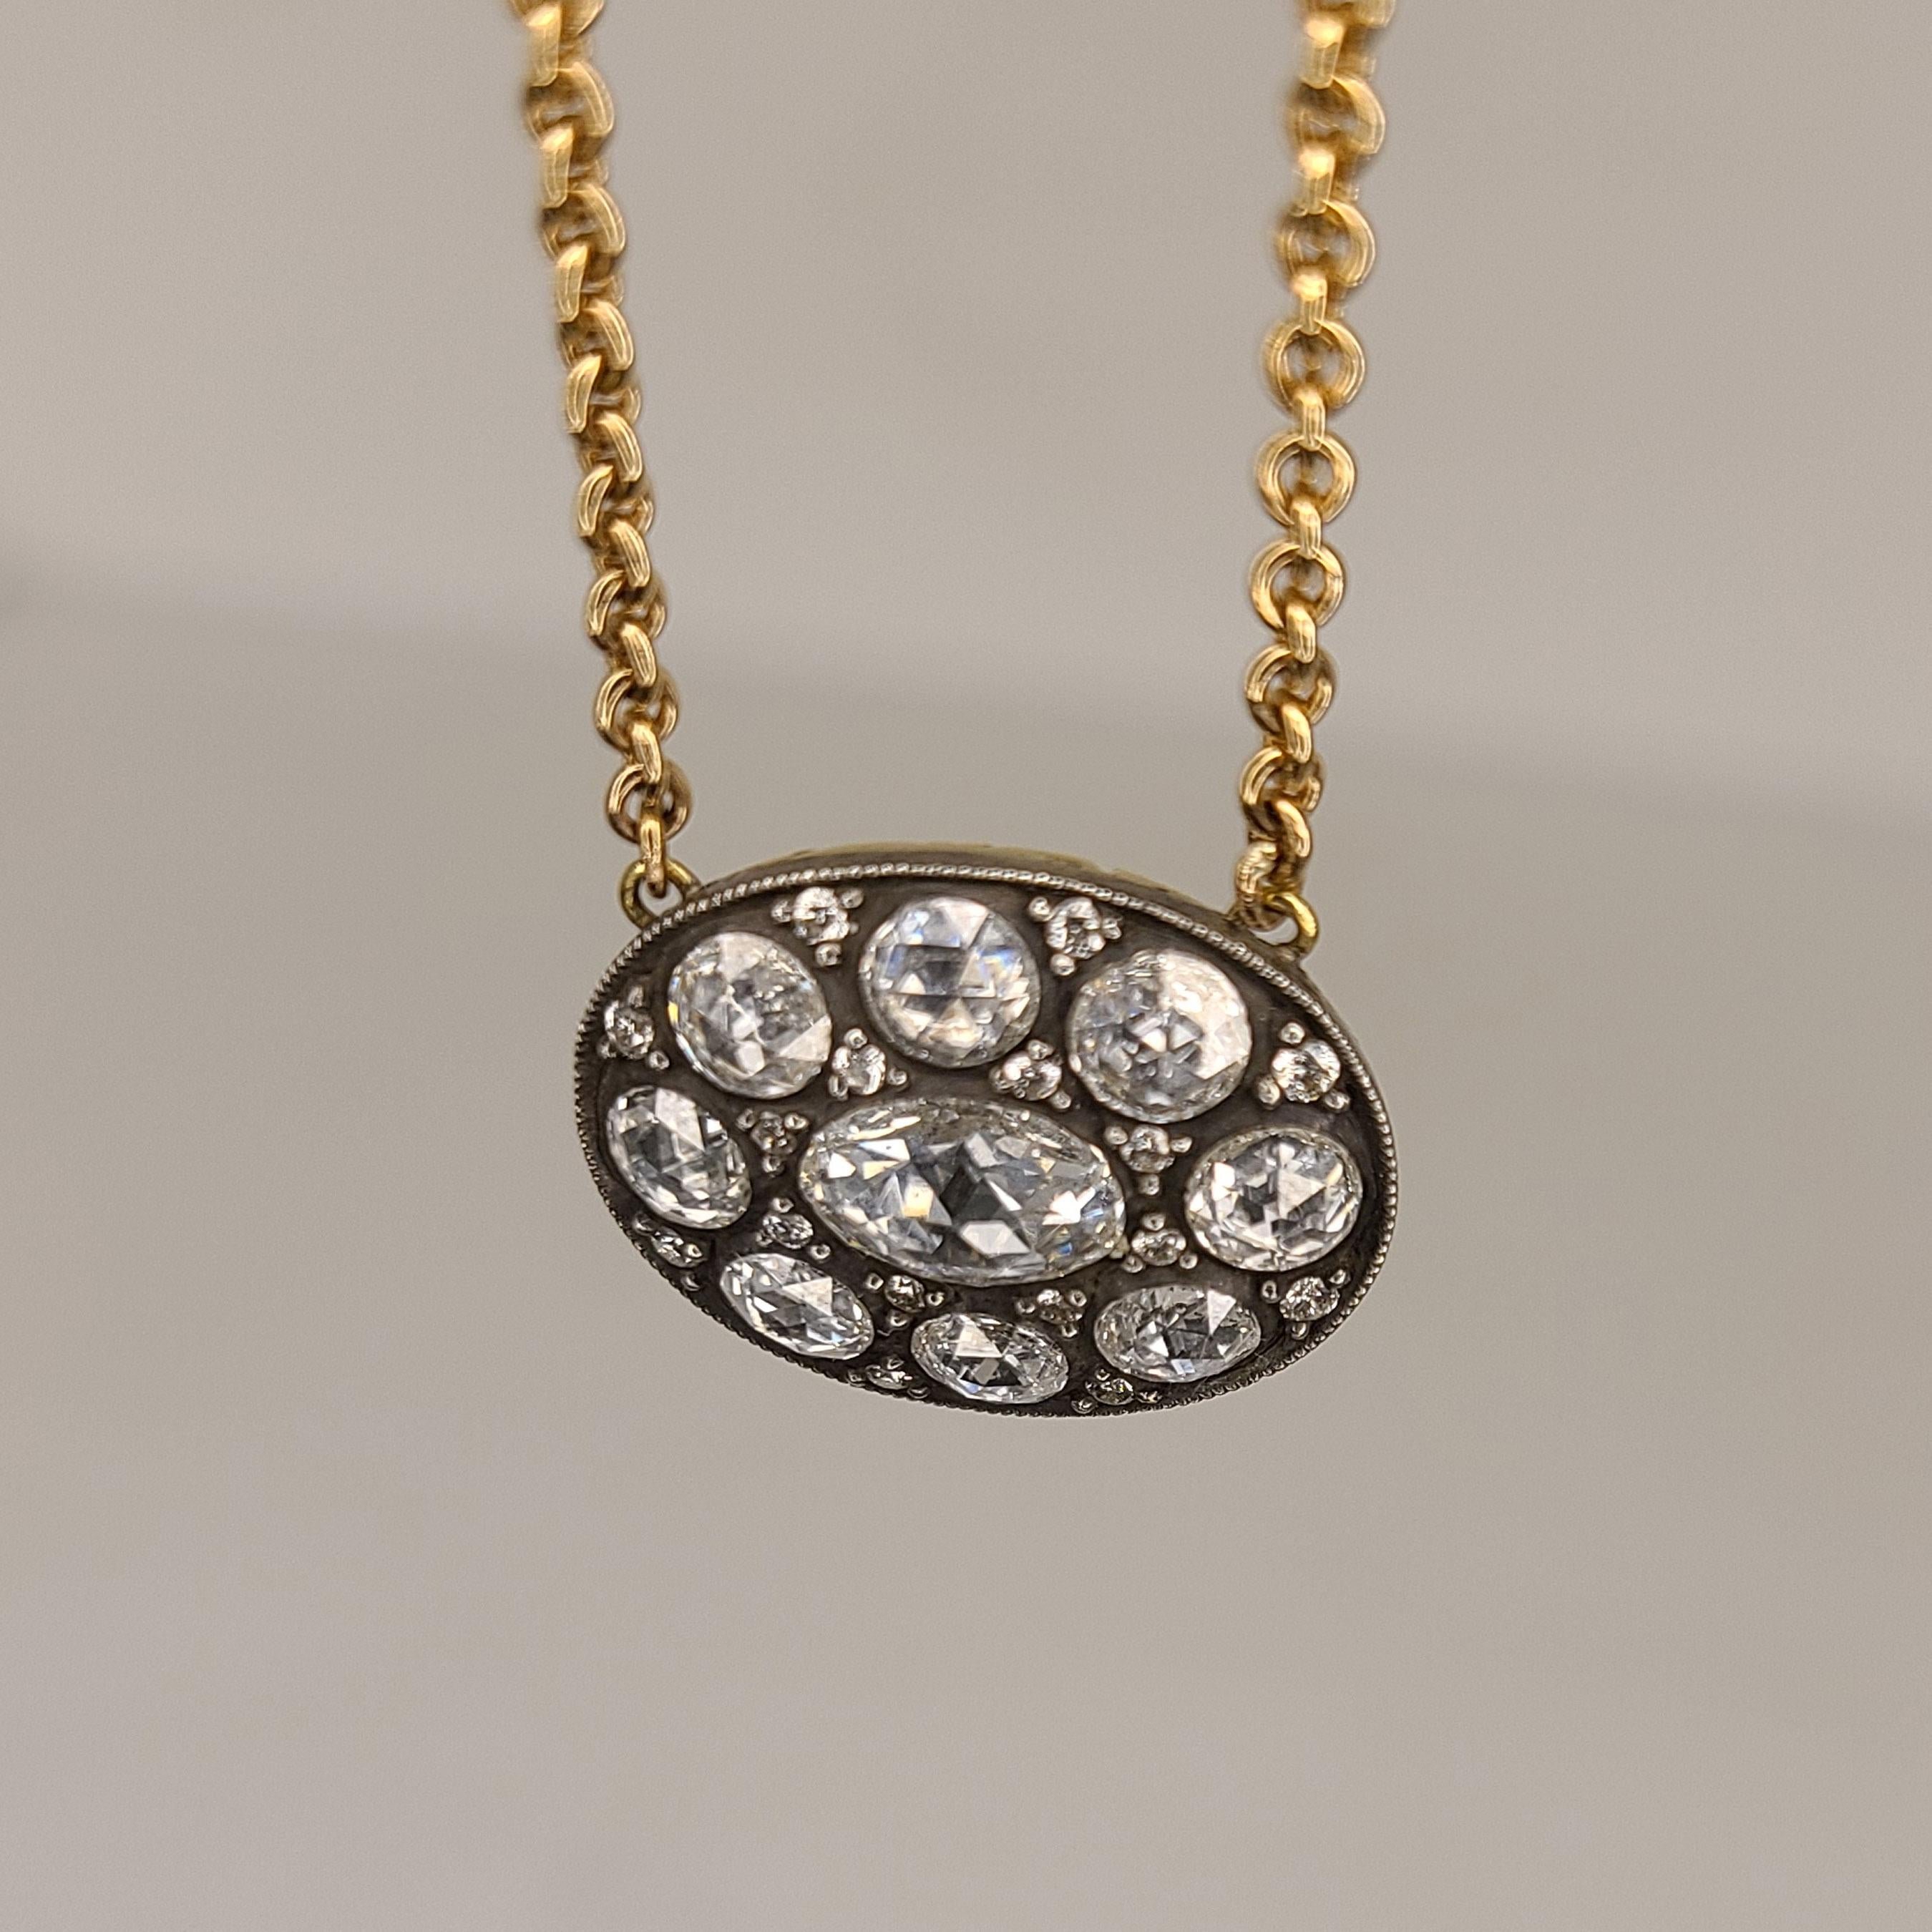 This one of a kind 18K Gold cluster necklace has rose-cut Diamonds of 1.39cts. The chain is 20 inches long and can be easily resized upon order. It is made of 18K Gold, however the rose-cut Diamonds are set on a sterling Silver just like in its